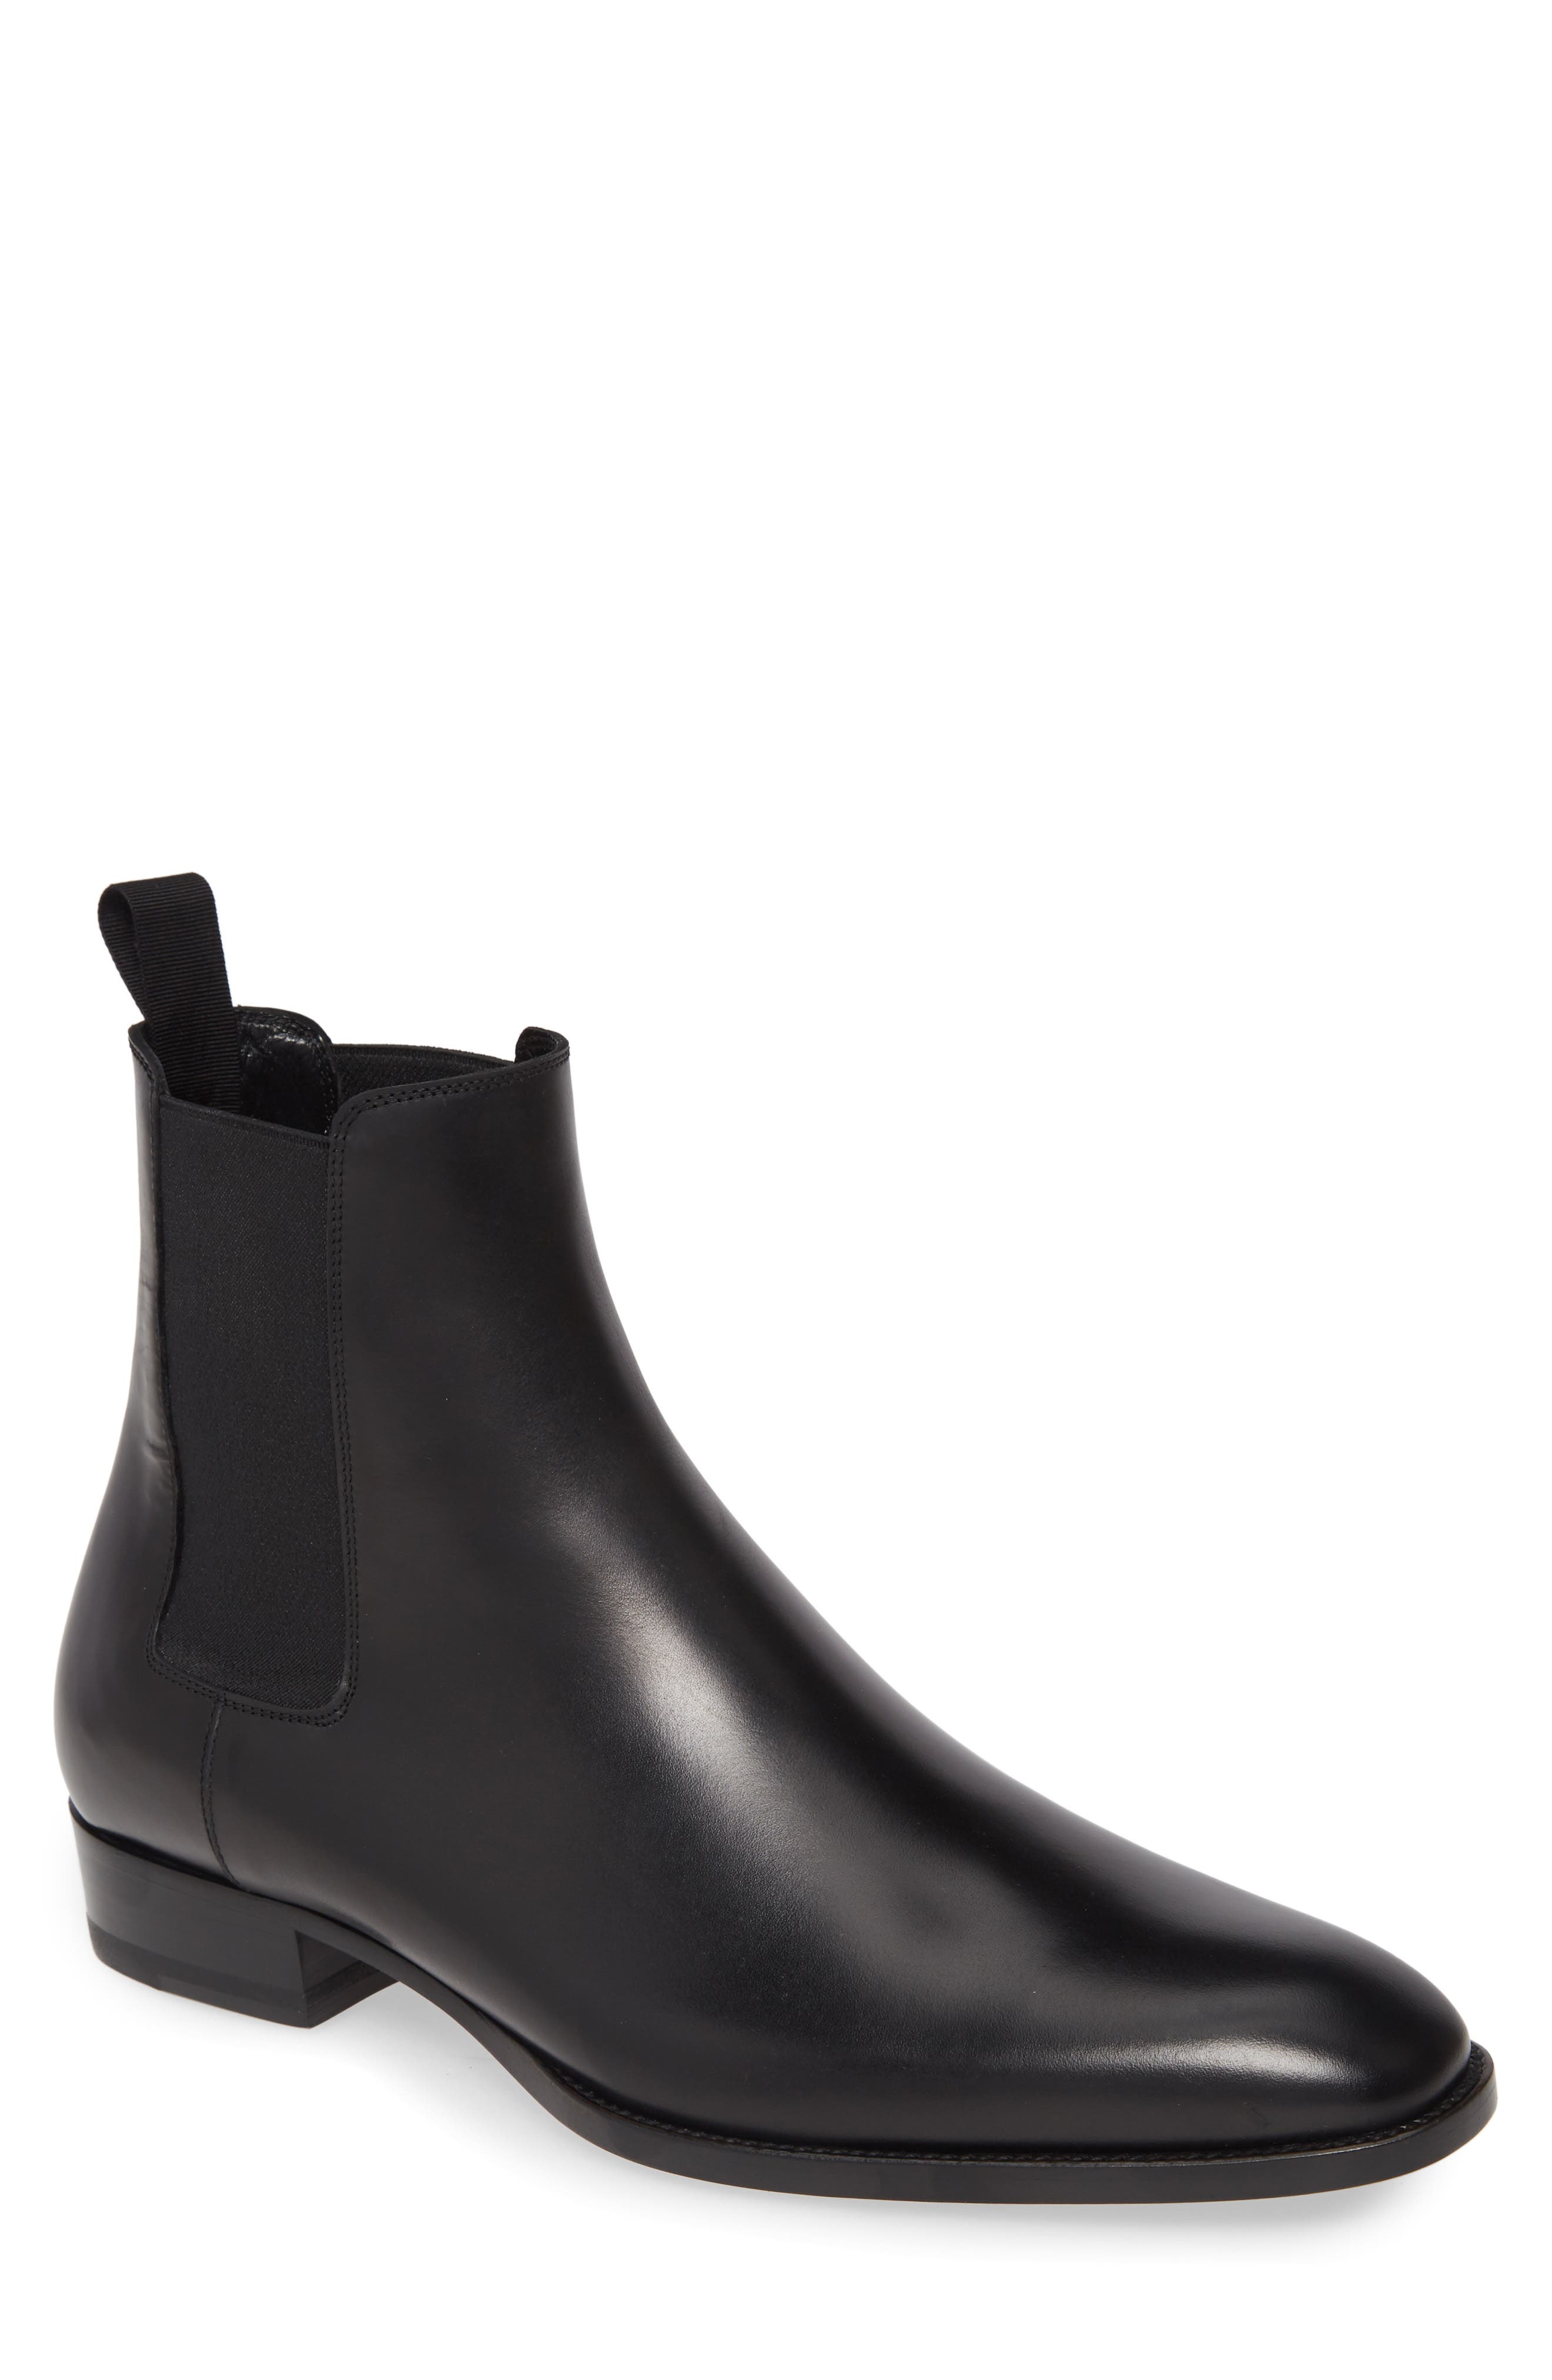 ysl chelsea boots mens